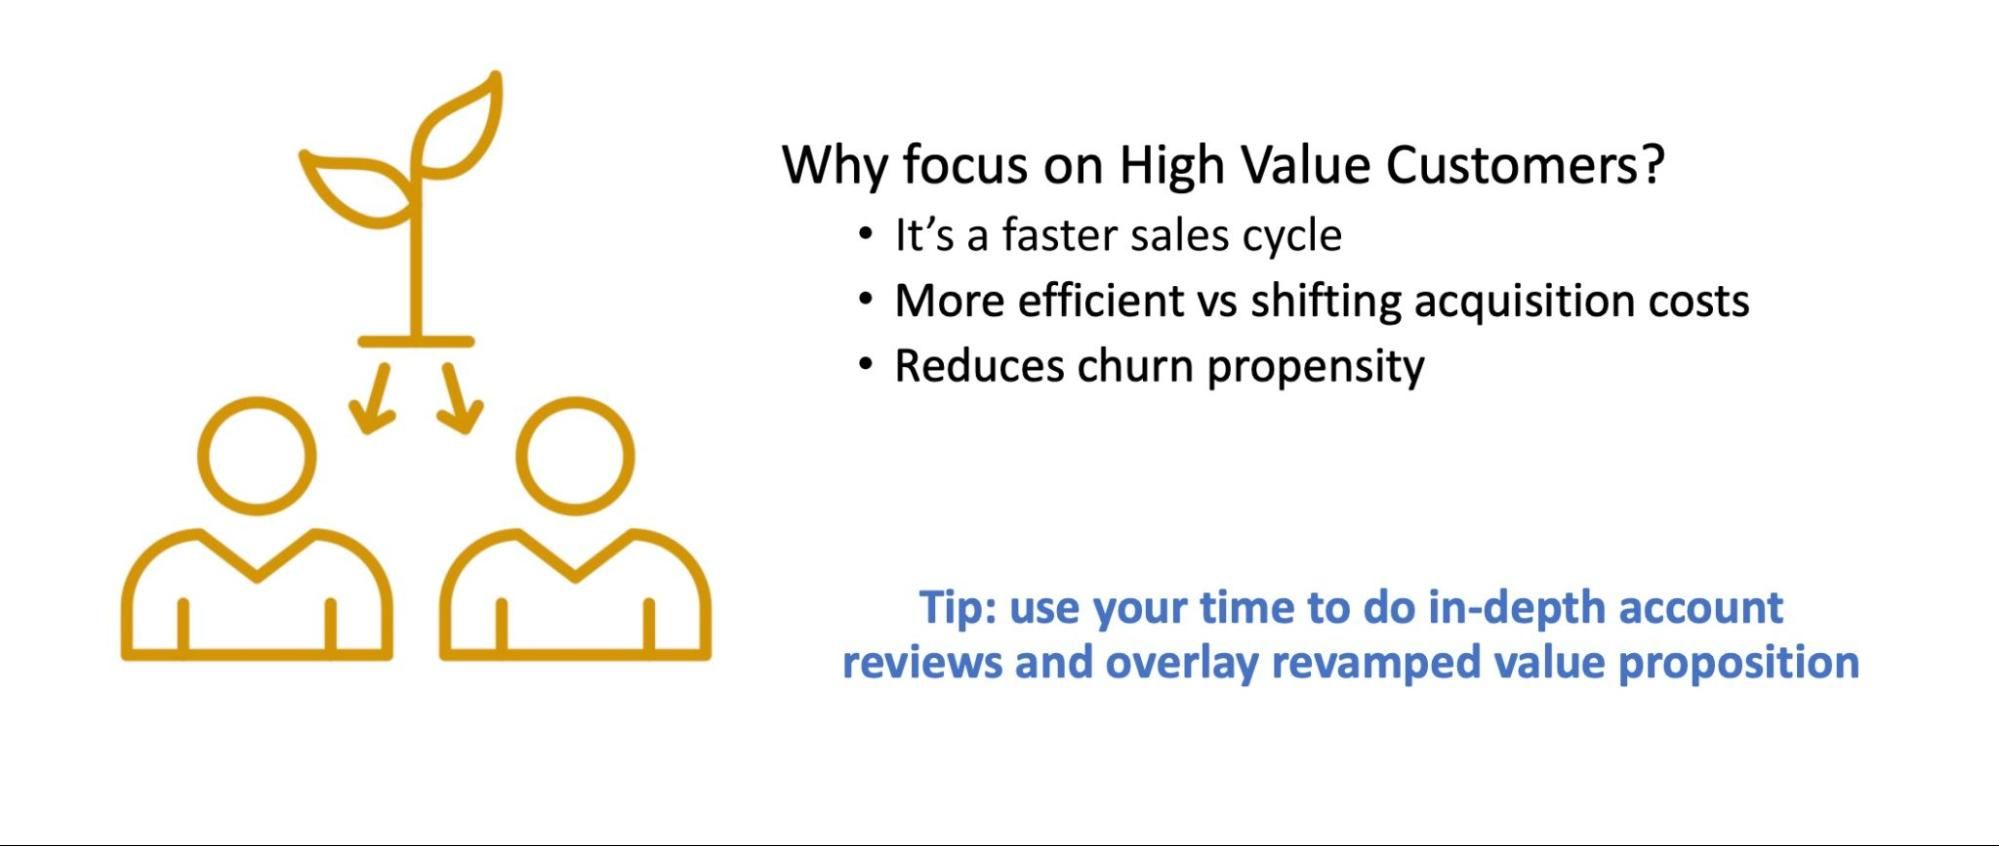 why focus on high value customers?